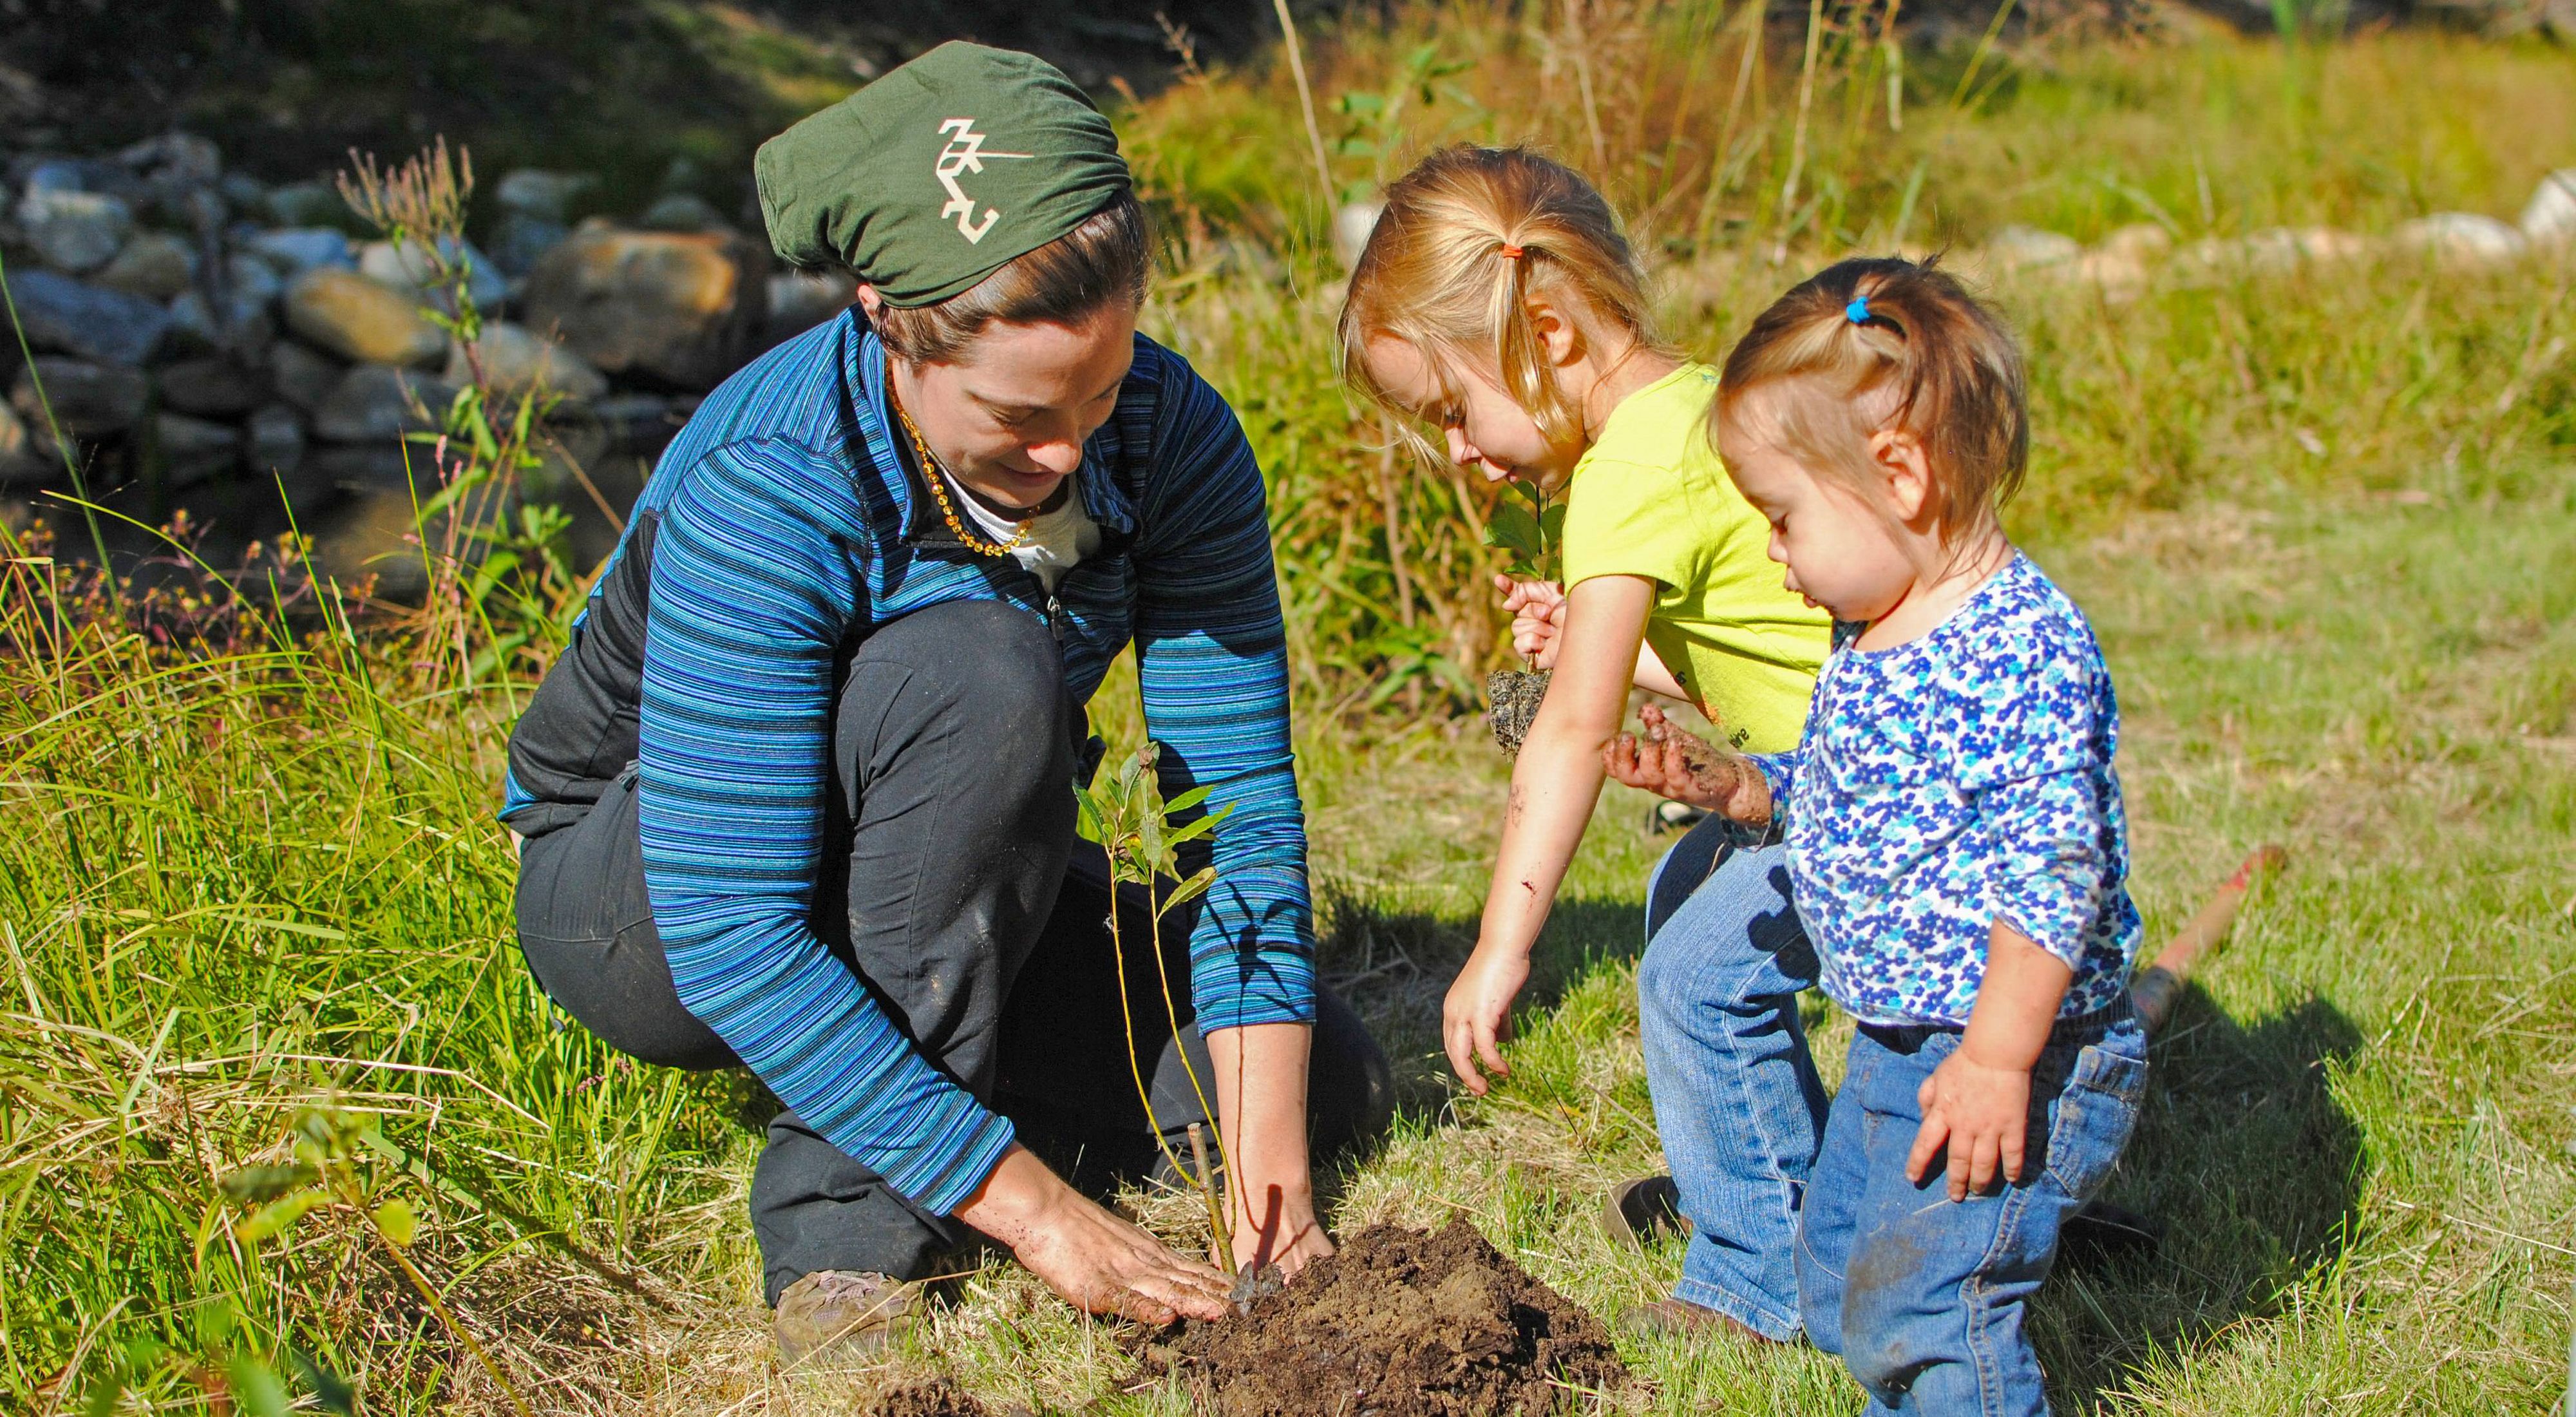 A volunteer plants a tree with help from two young children.